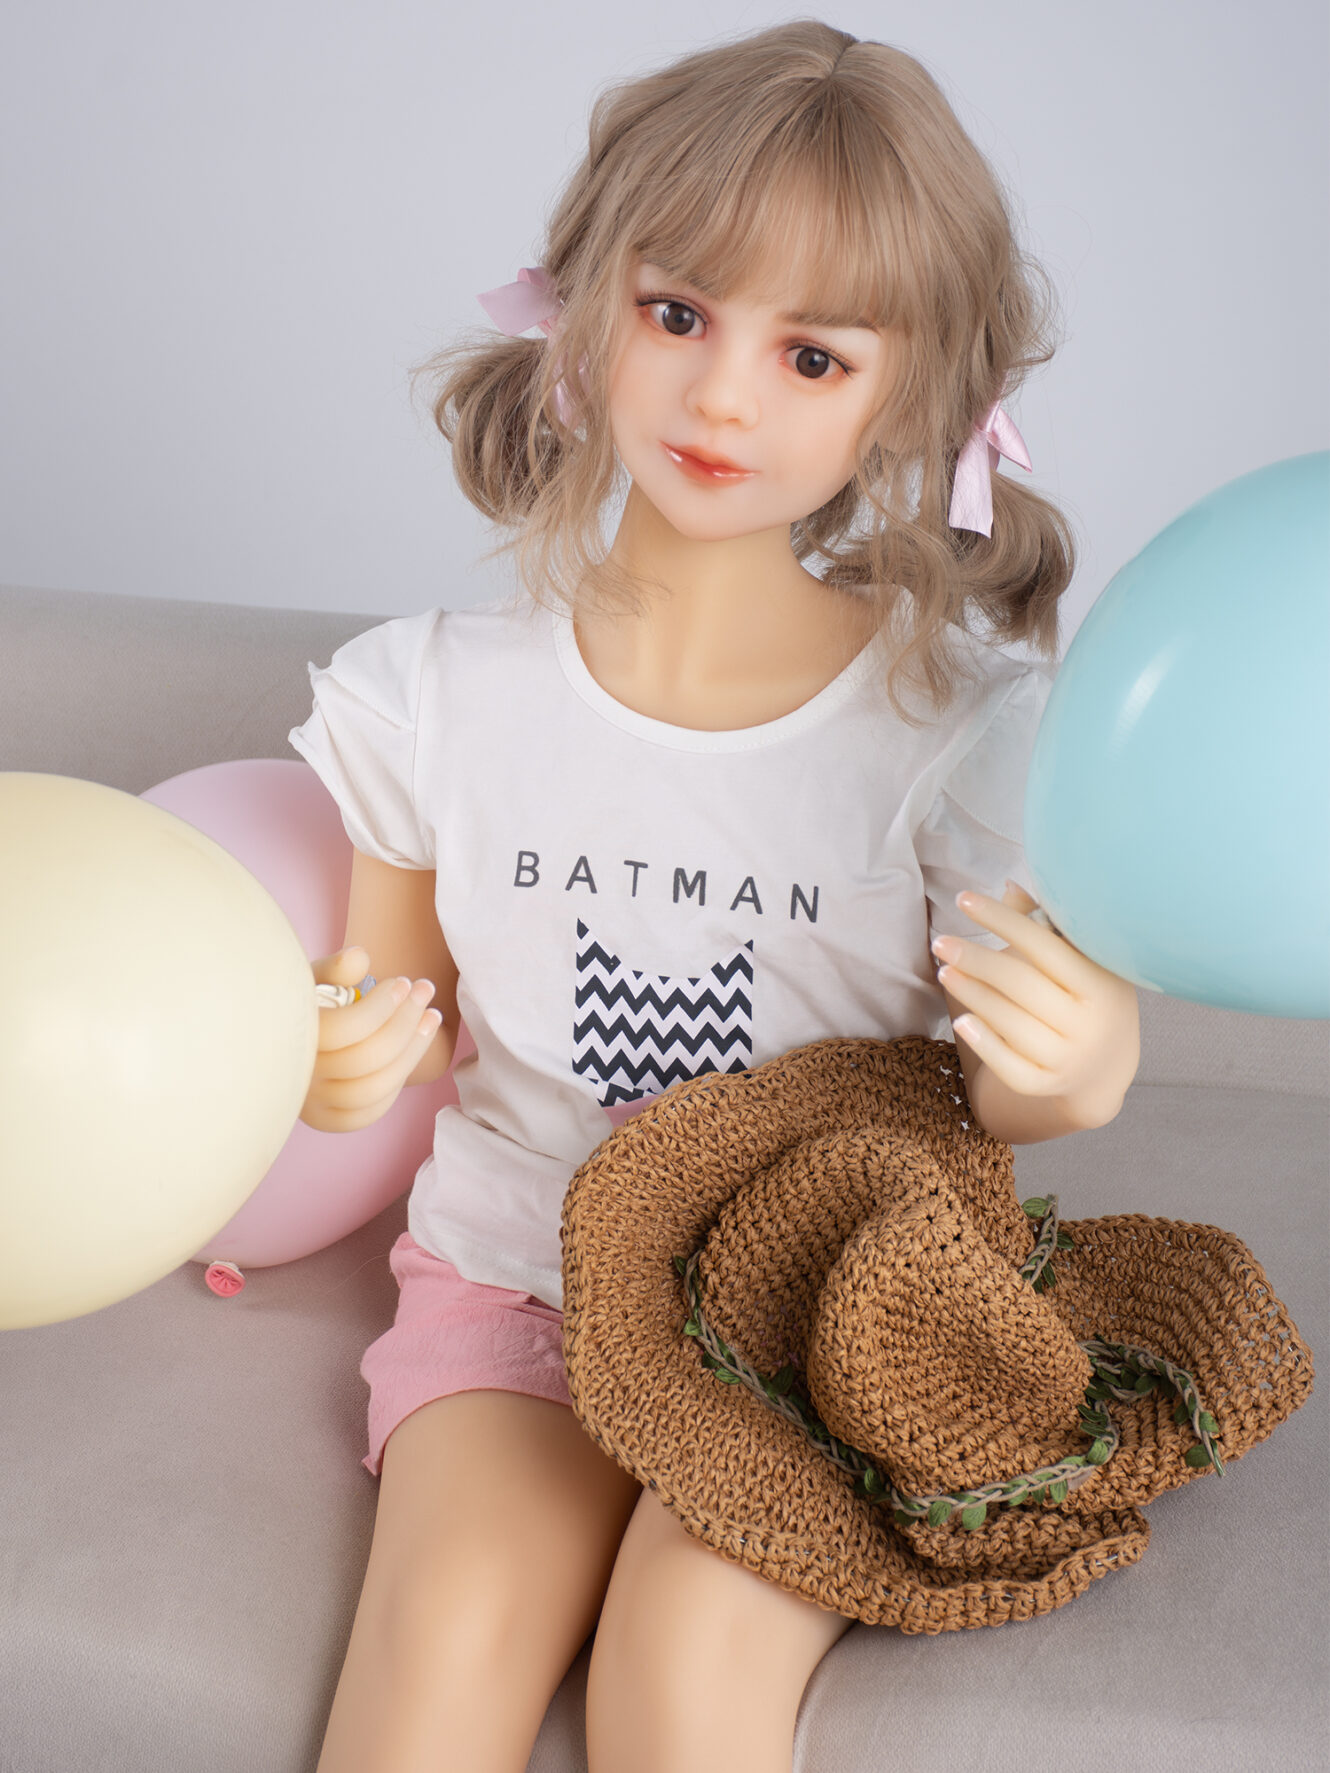 american flat chest sex doll holding balloons